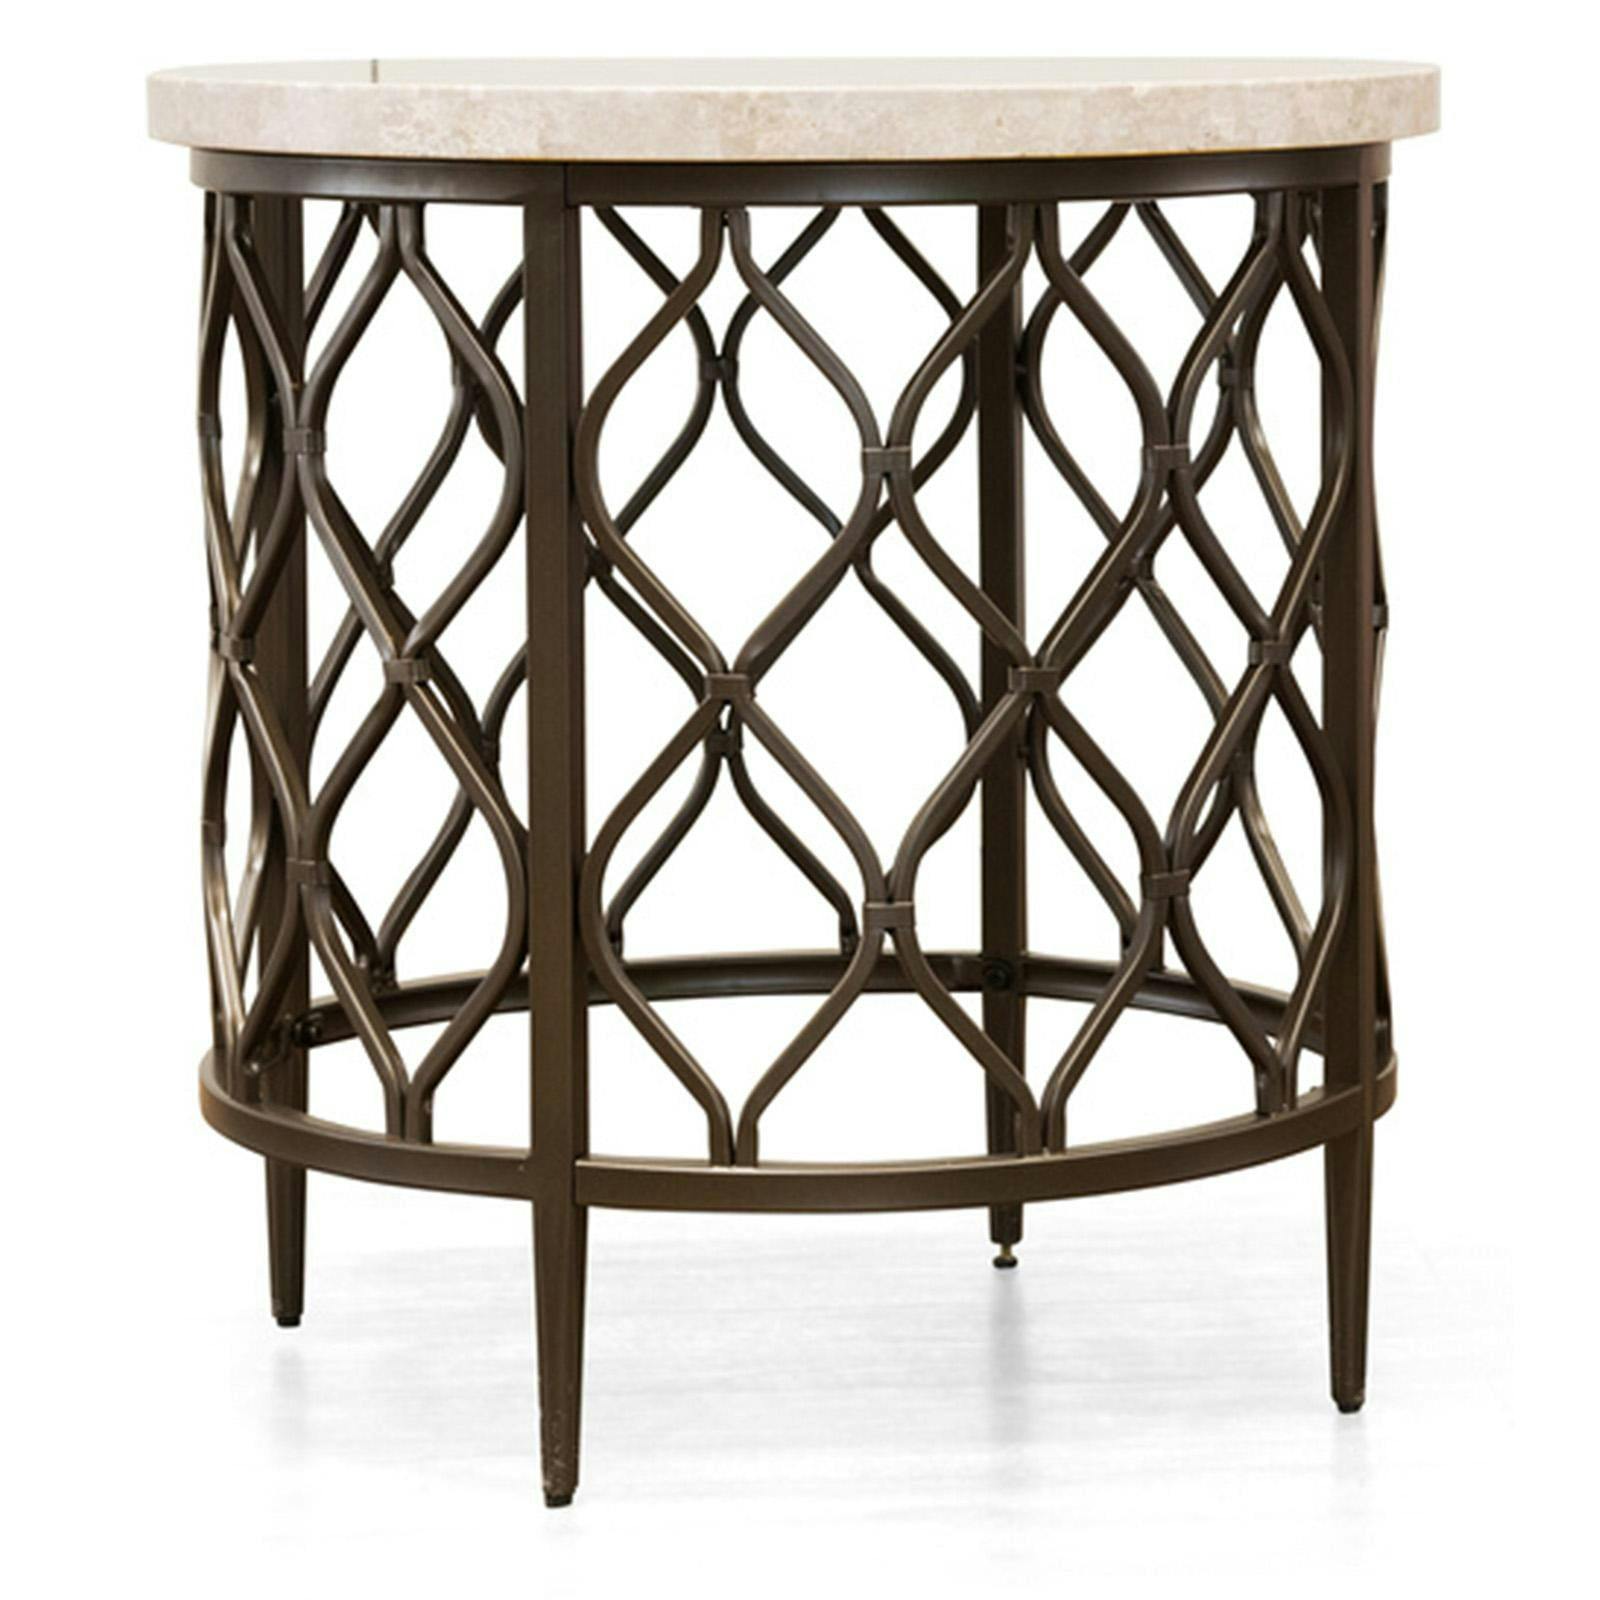 24" Transitional Round Stone Top End Table with Bronze Metal Base